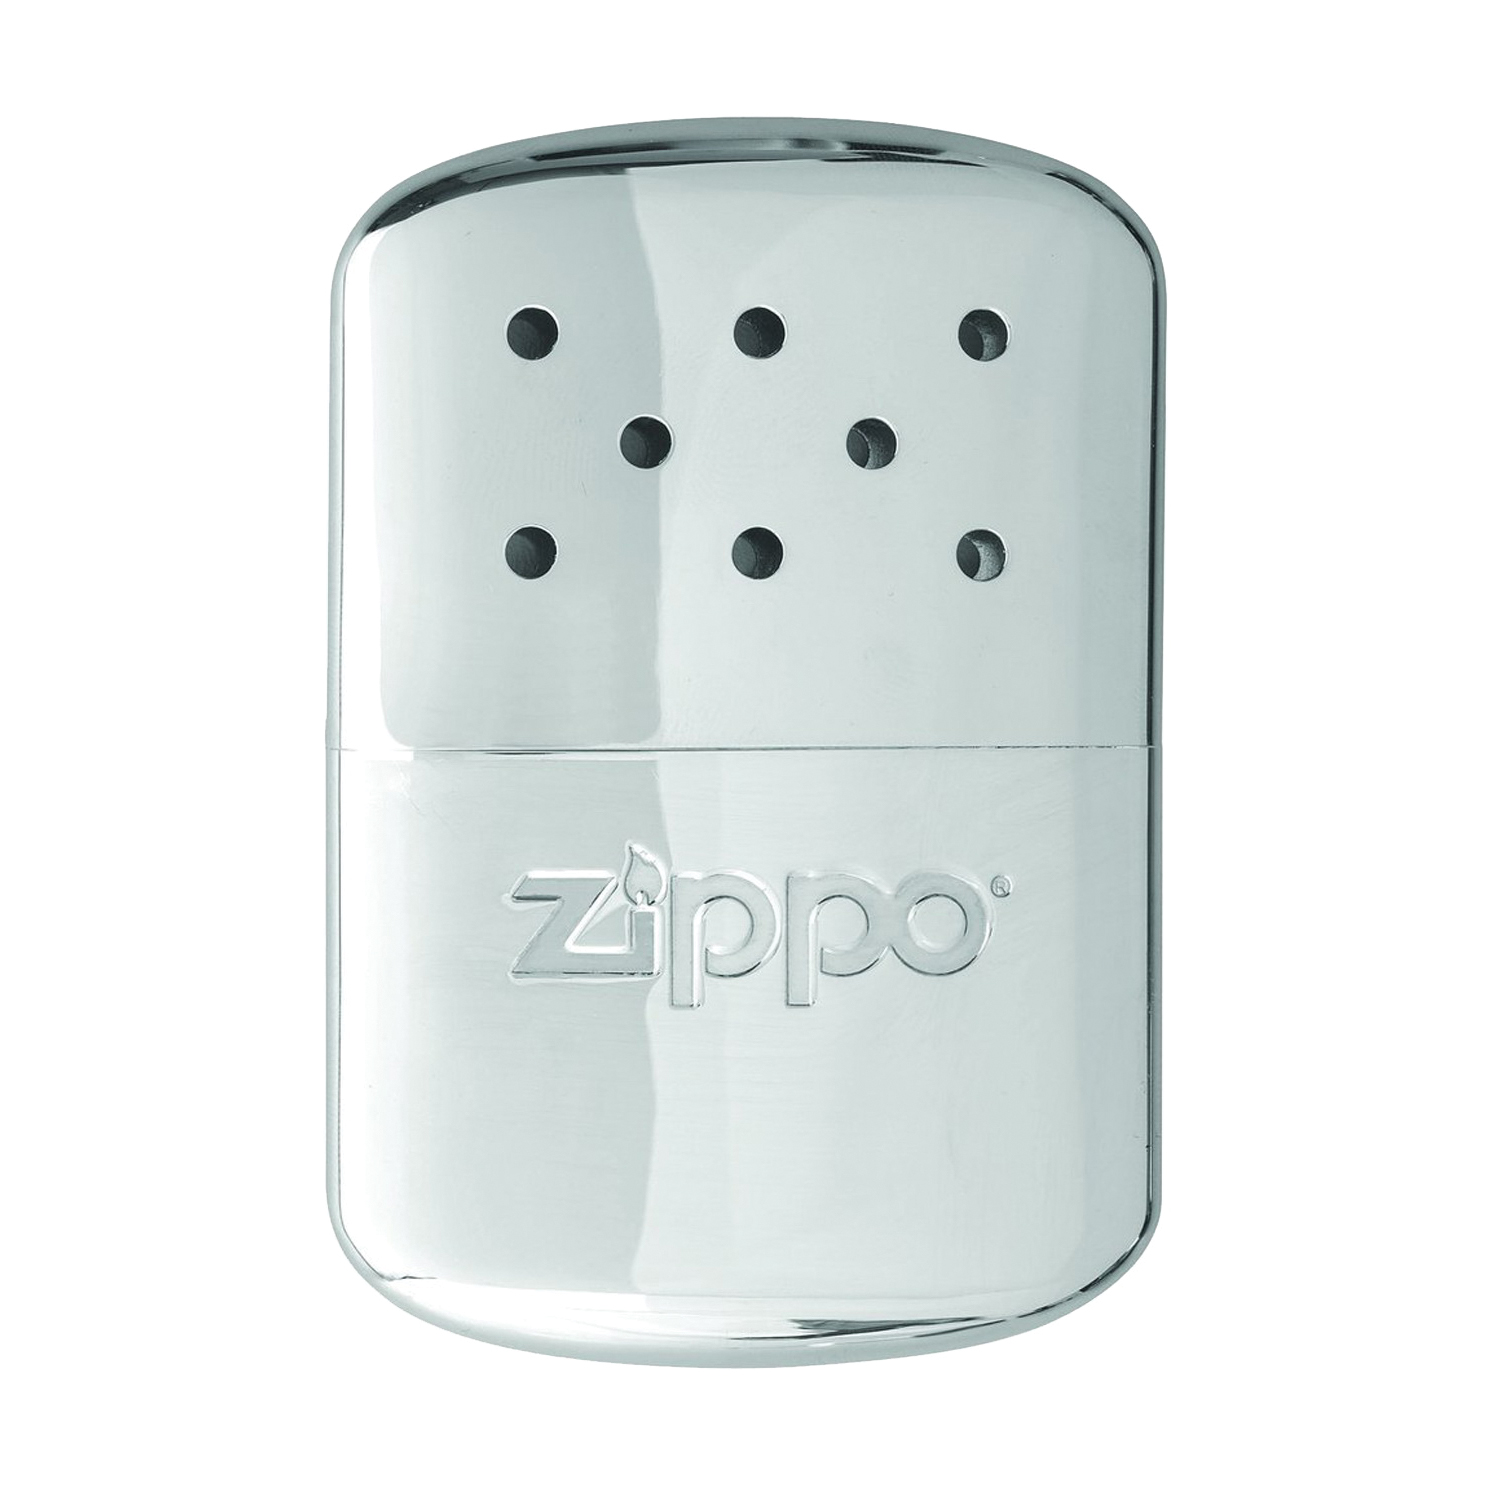 ZIPPO Fire Pits & Accessories at